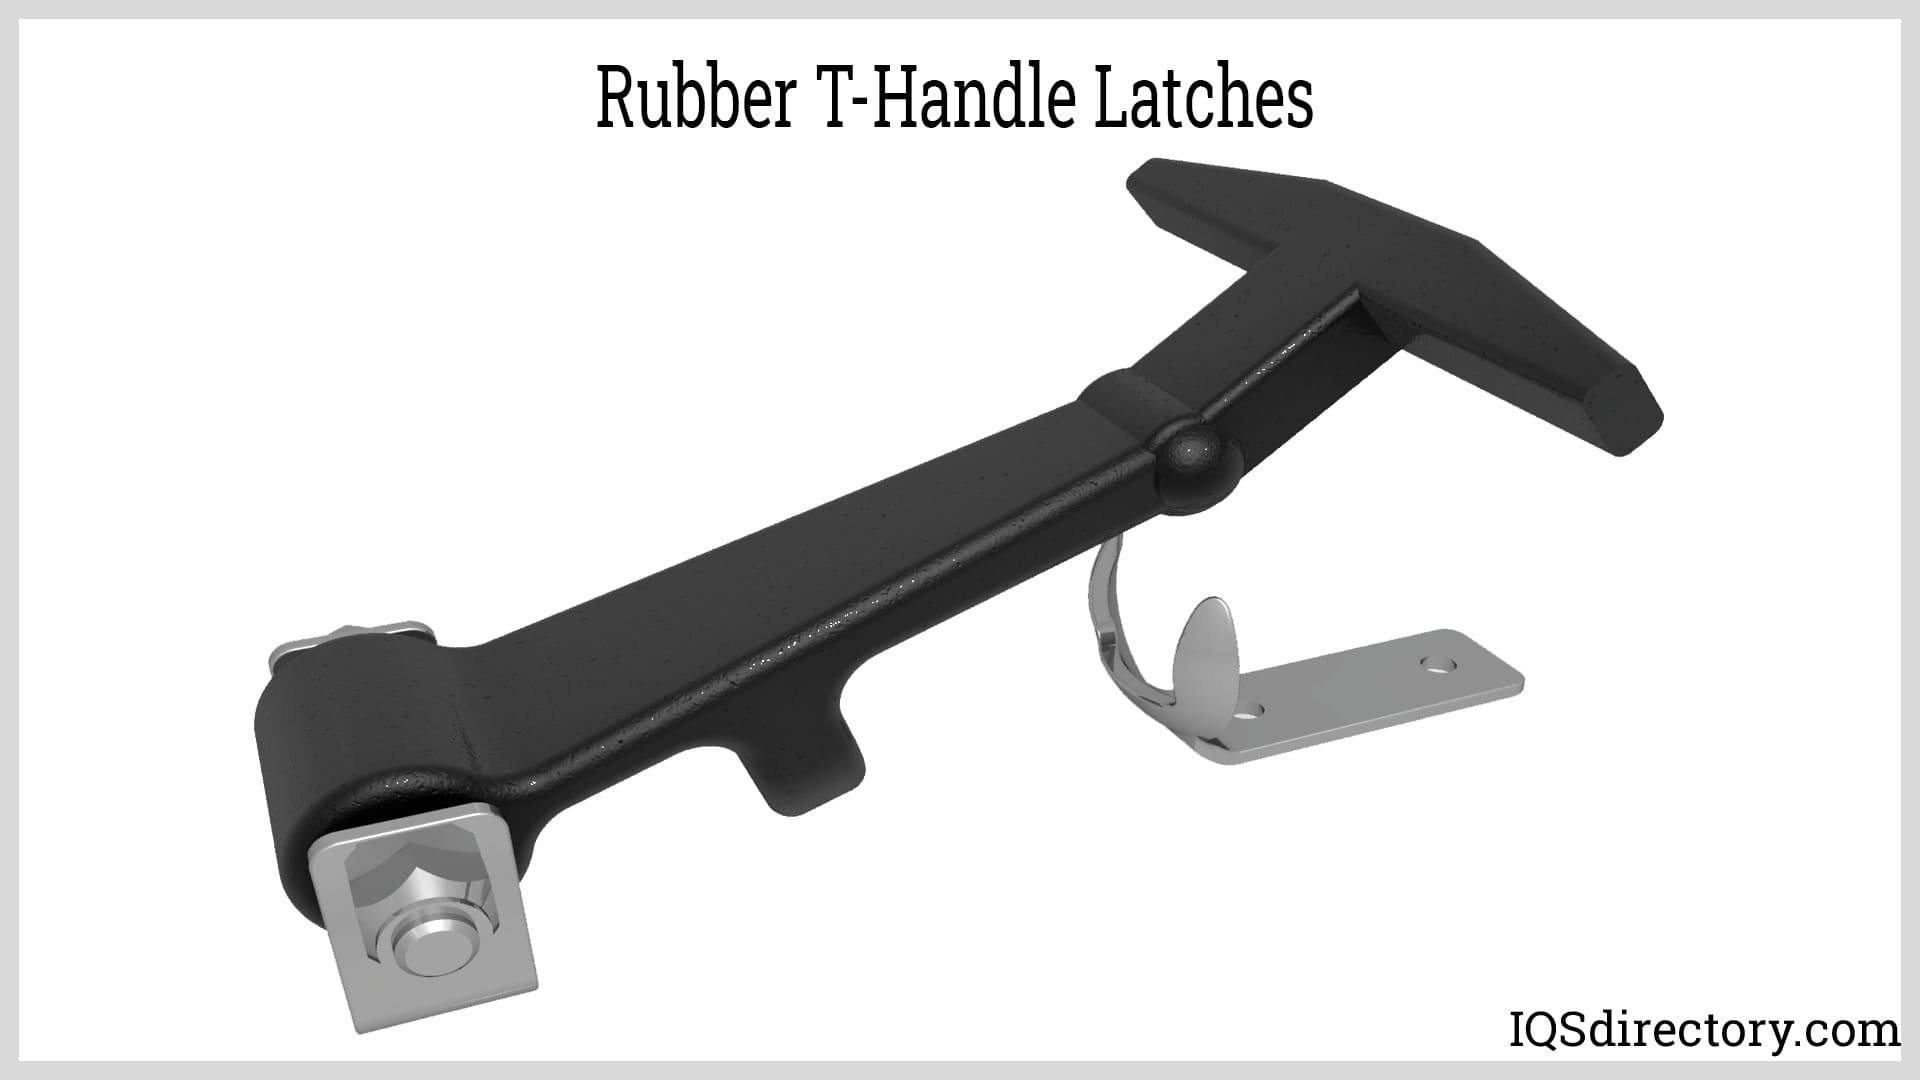 Rubber T-Handle Latches